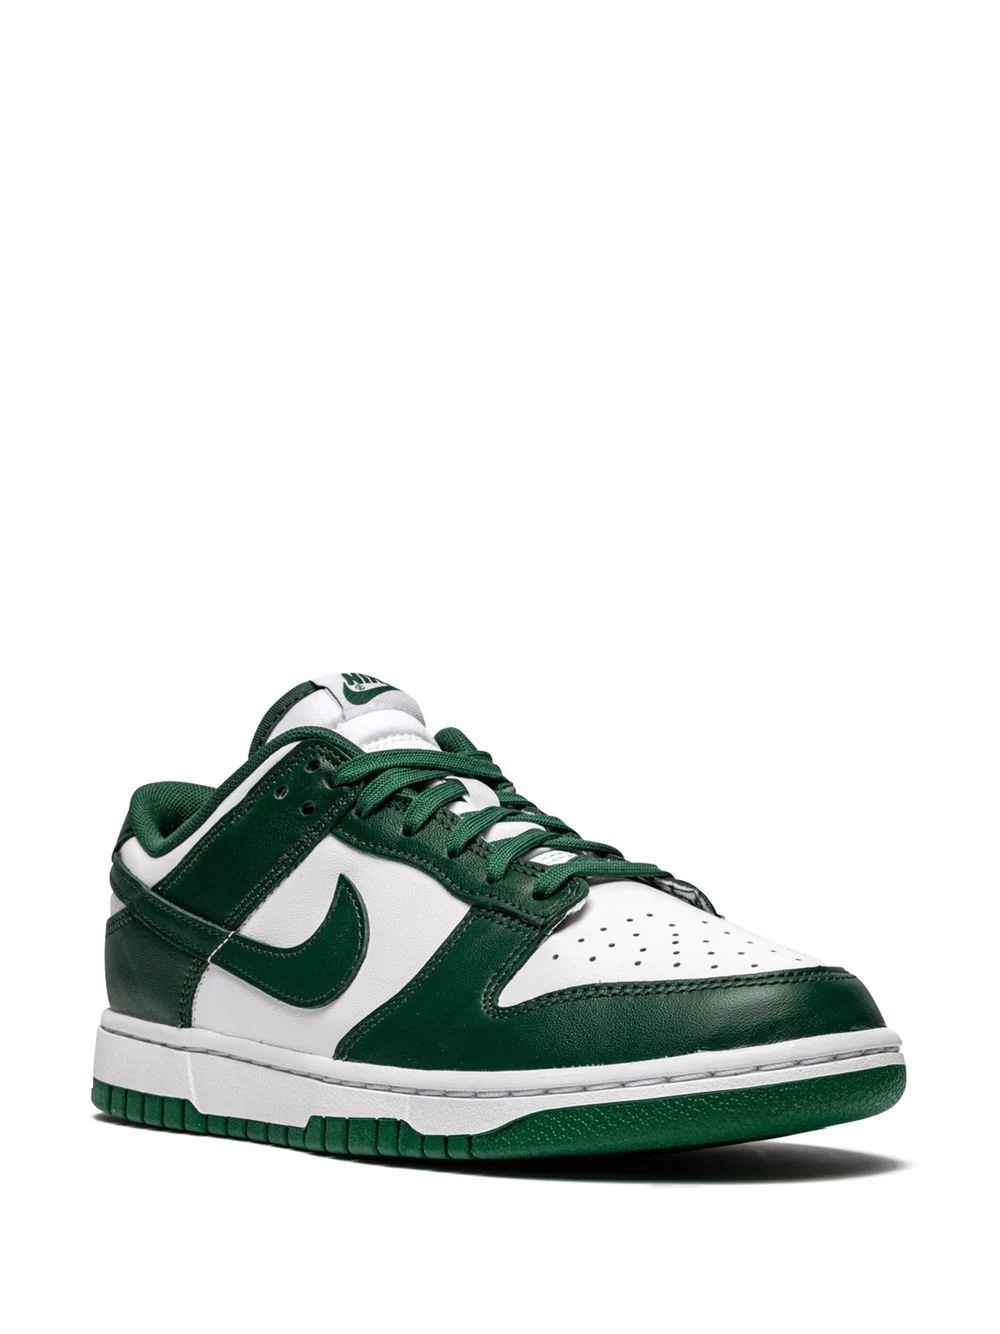 Dunk Low "Team Green" sneakers - 2